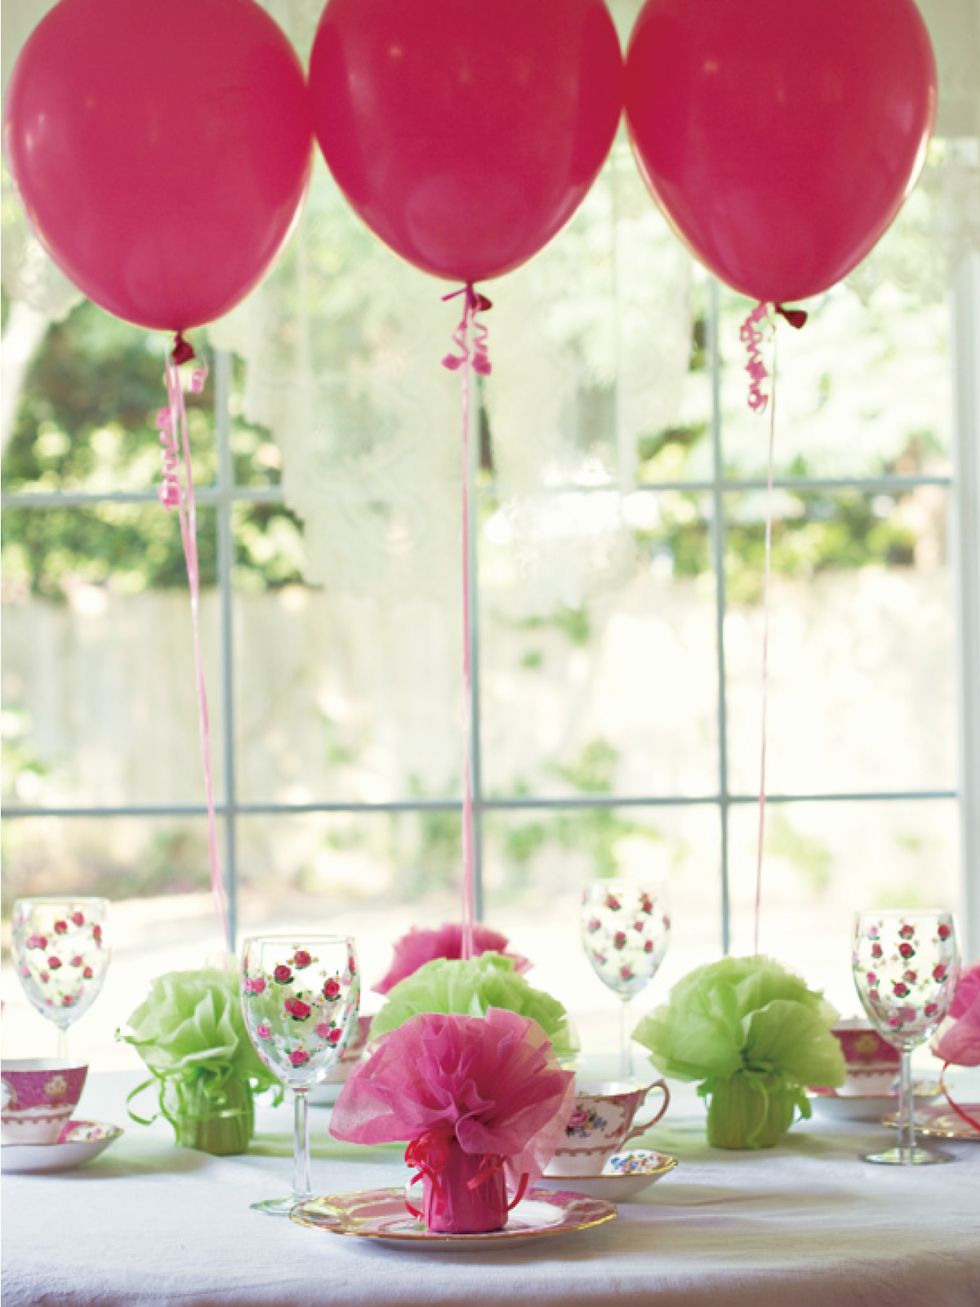 Balloon, Pink, Party supply, Decoration, Centrepiece, Party, Magenta, Birthday, Table, Event, 